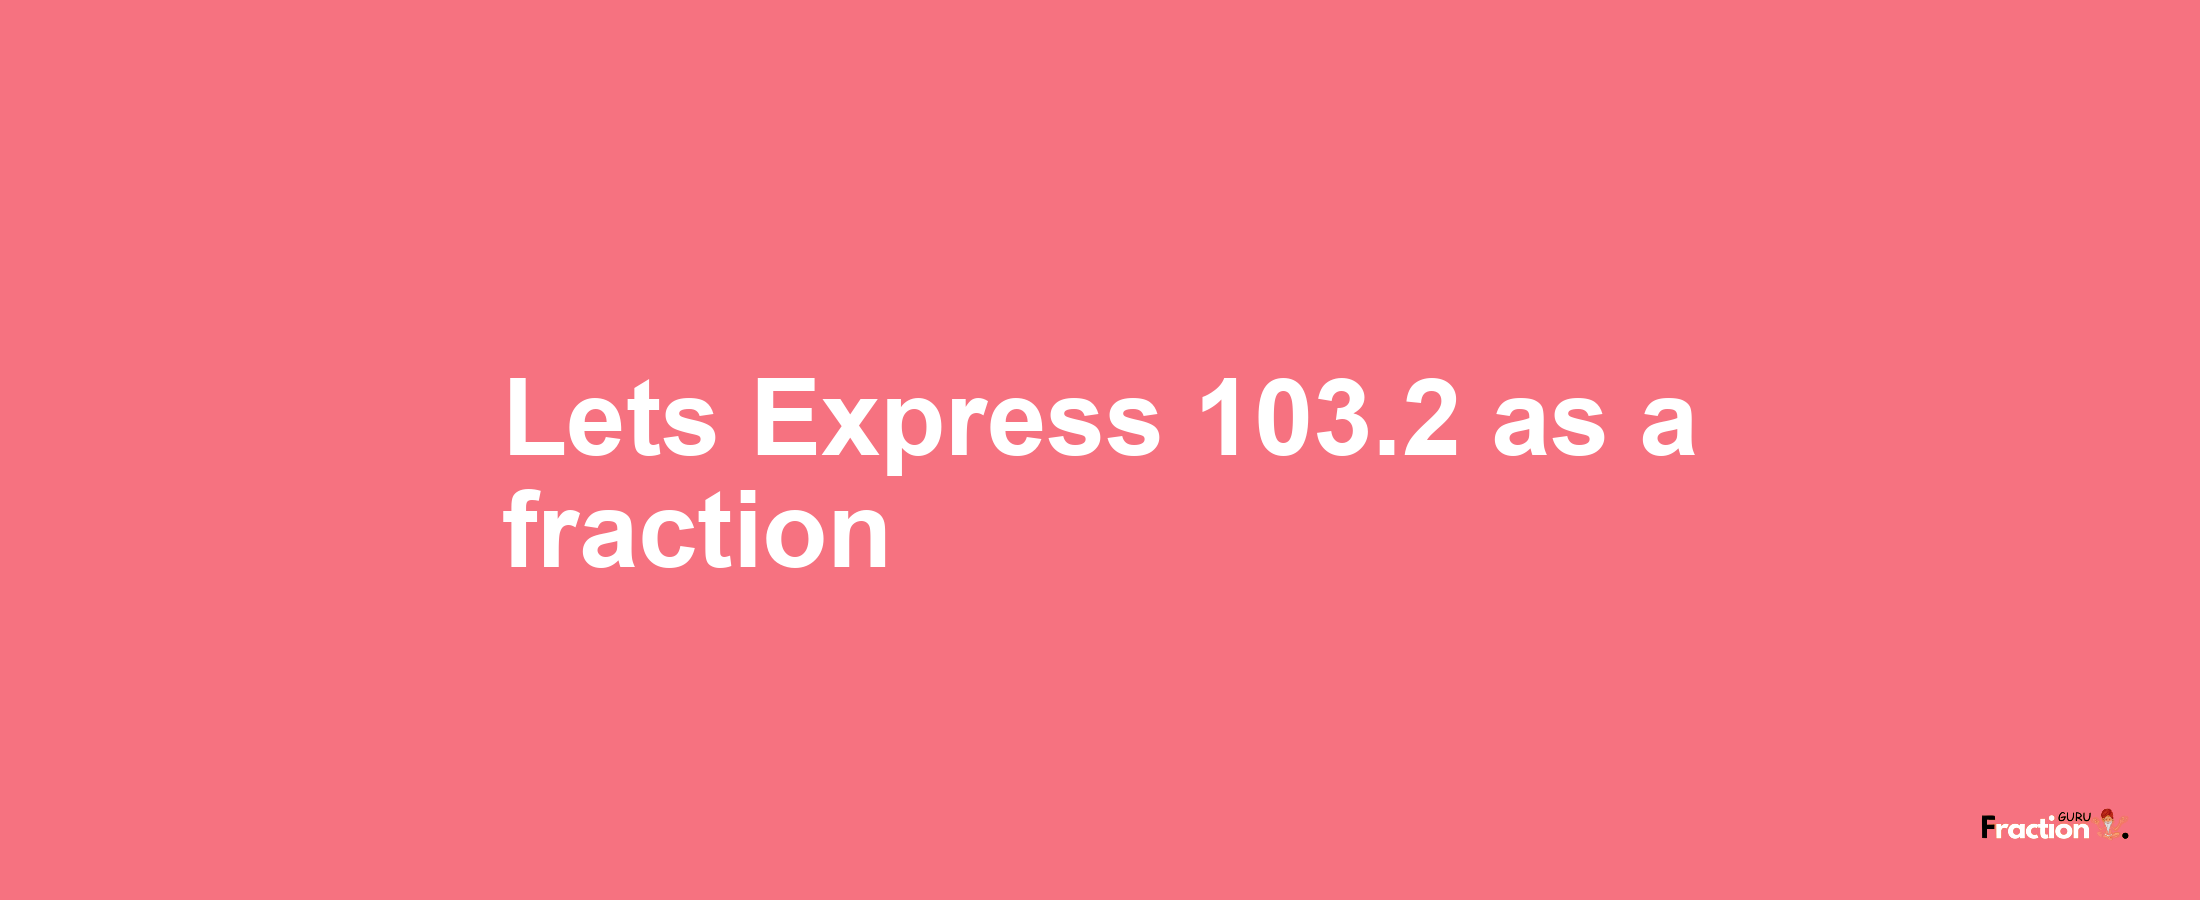 Lets Express 103.2 as afraction